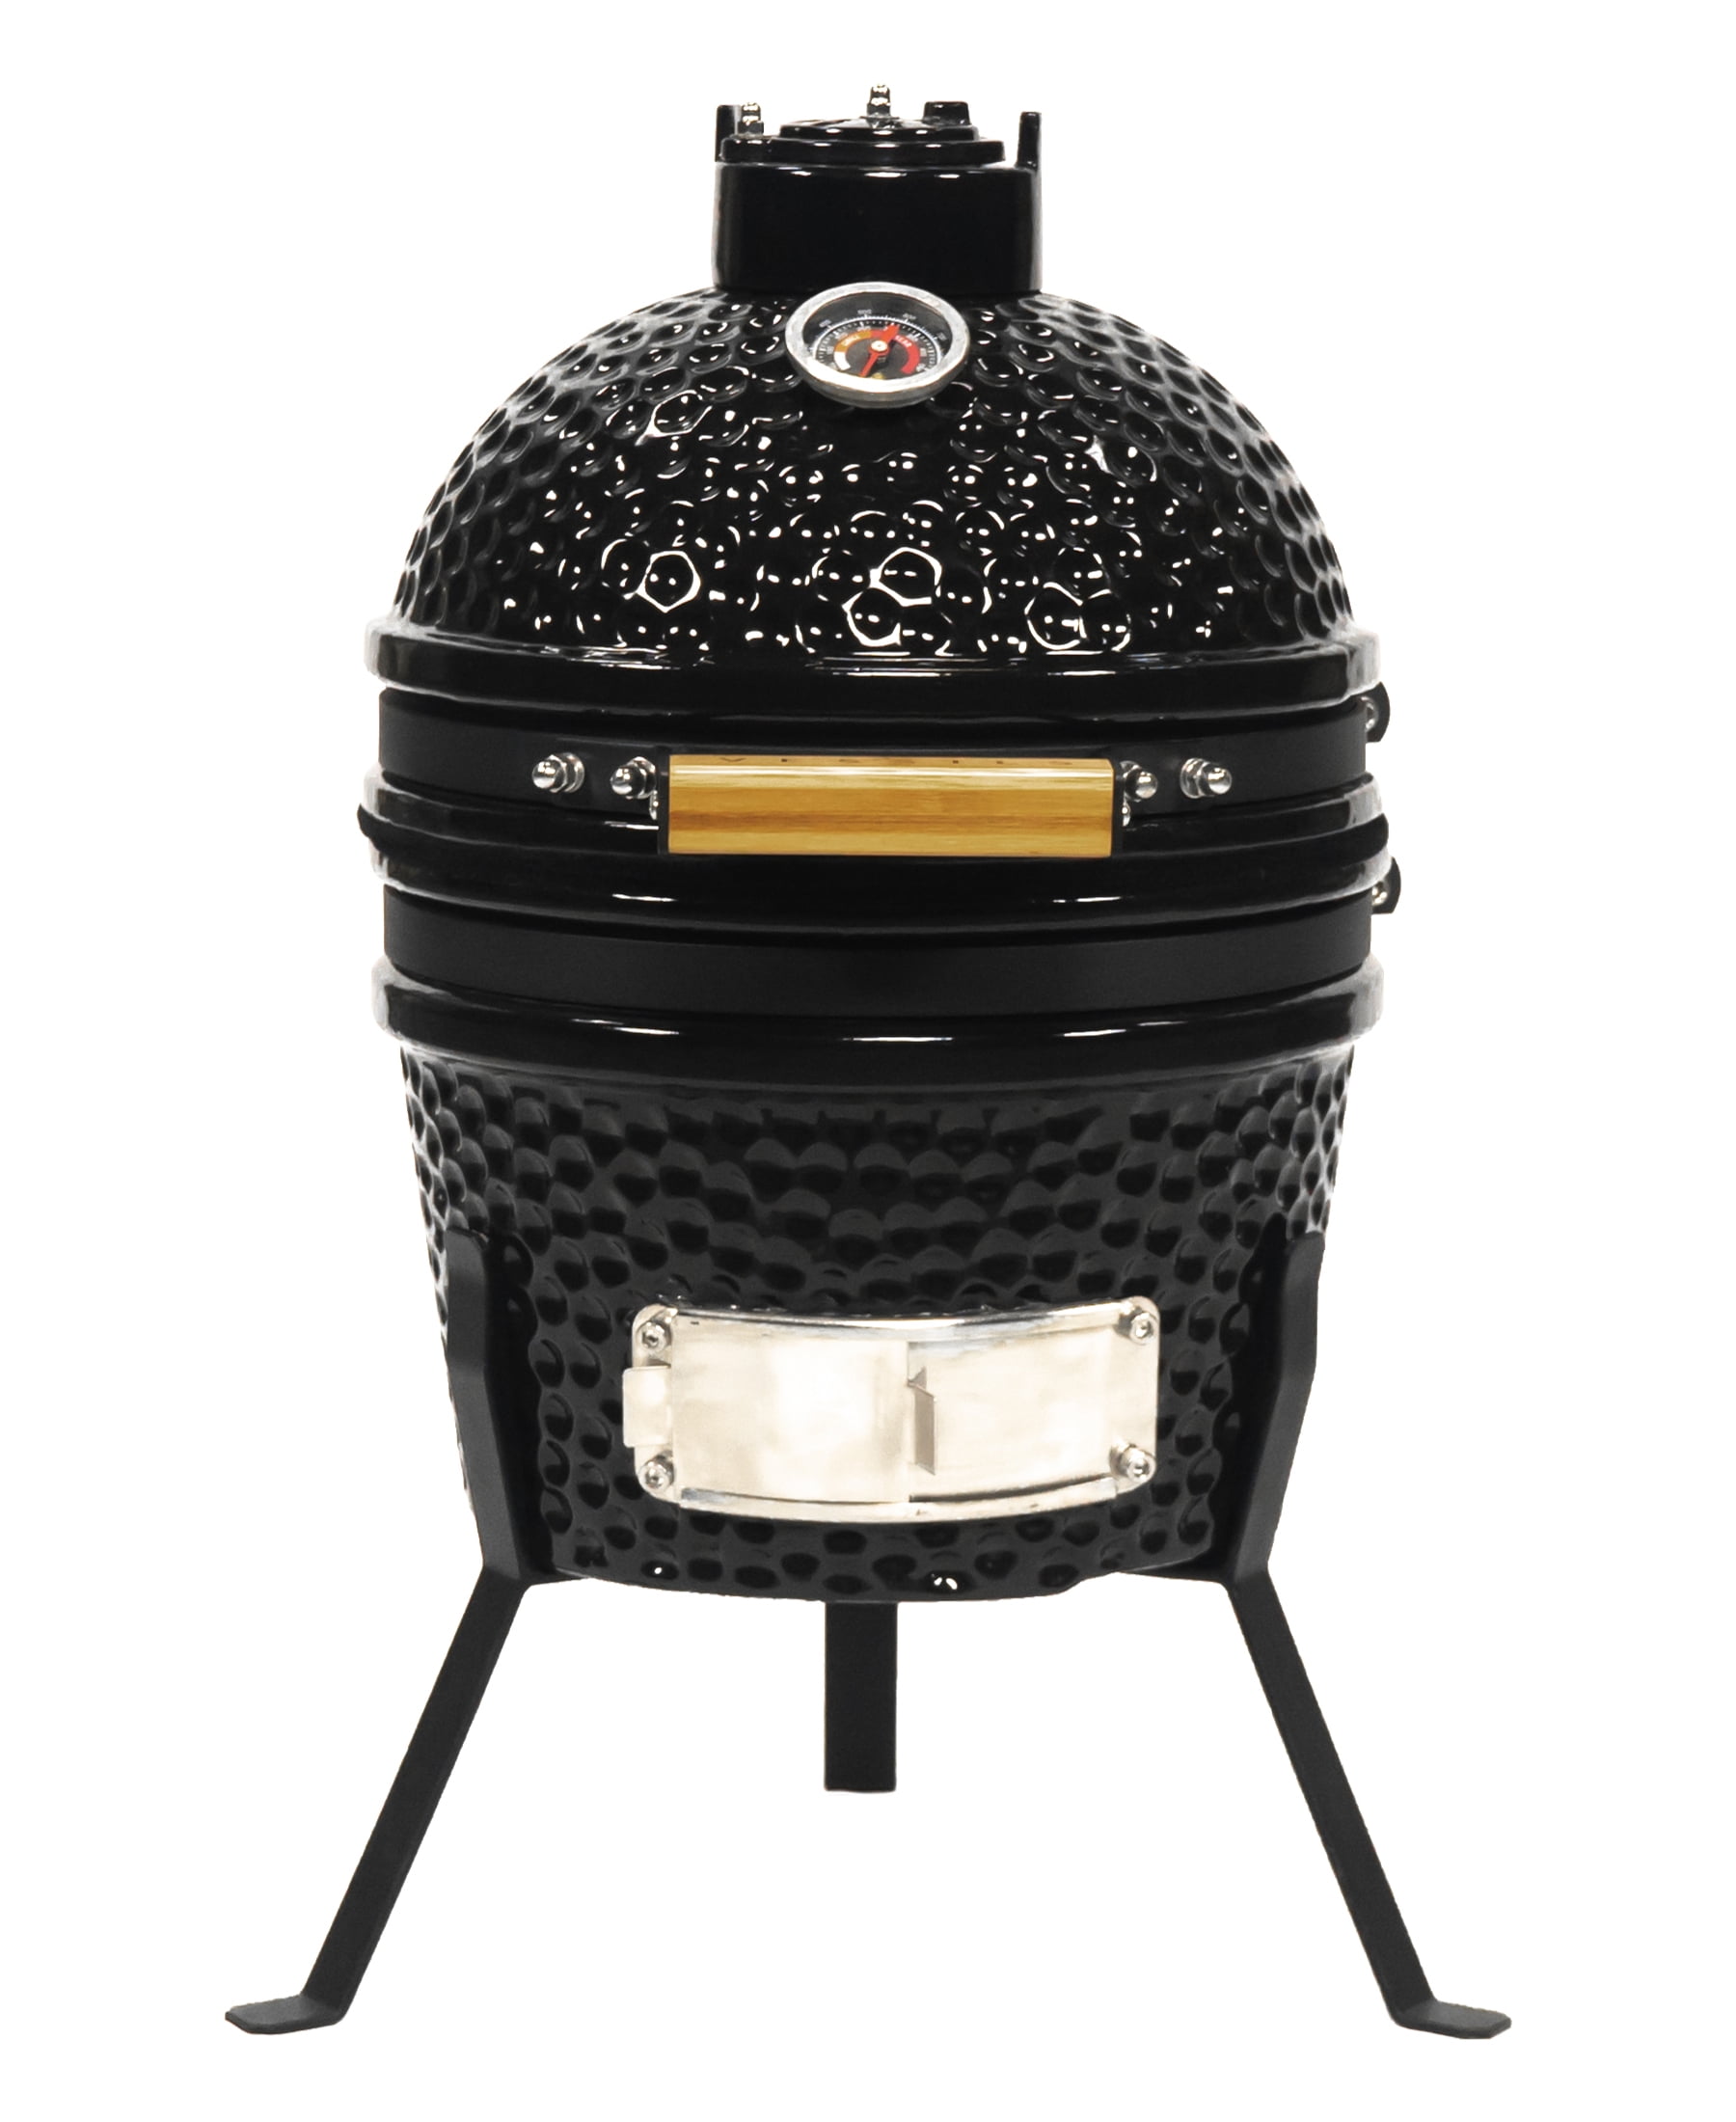 Inch Kamado Grill, VIK Multifunctional Ceramic Charcoal Egg Grill for Picnic BBQ Barbecue, Gray - Walmart.com